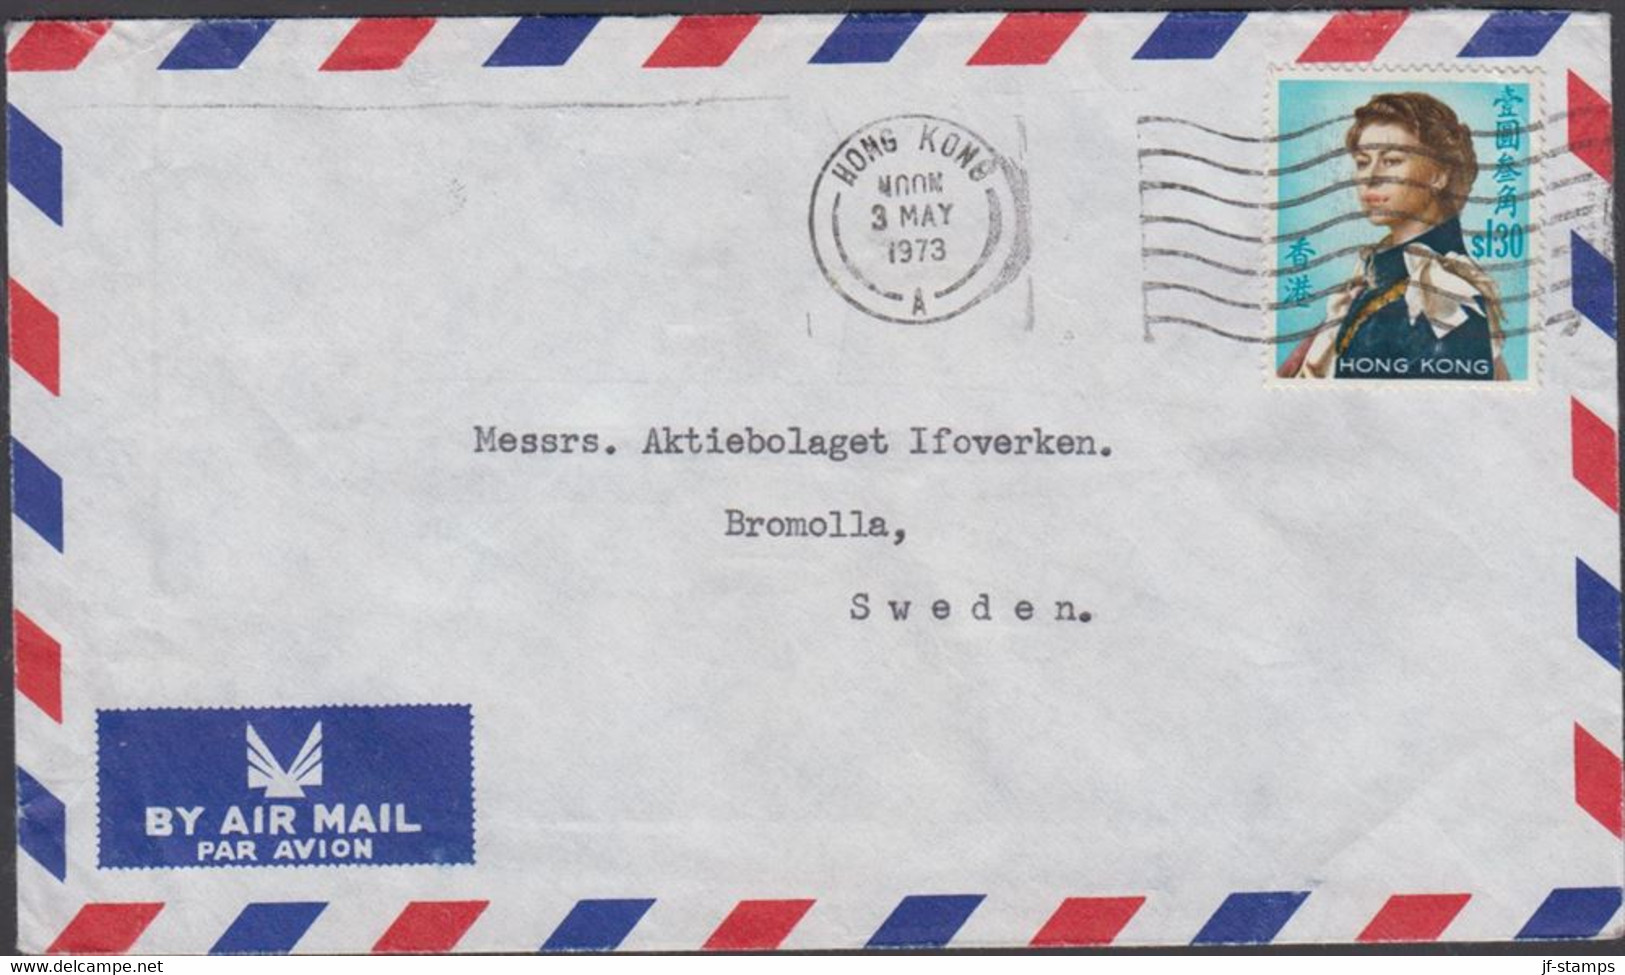 1973. HONG KONG. Elizabeth $ 1.30 On AIR MAIL Cover To Bromolla, Sweden From HONG KONG 3 MAY ... (Michel 206) - JF427083 - Covers & Documents